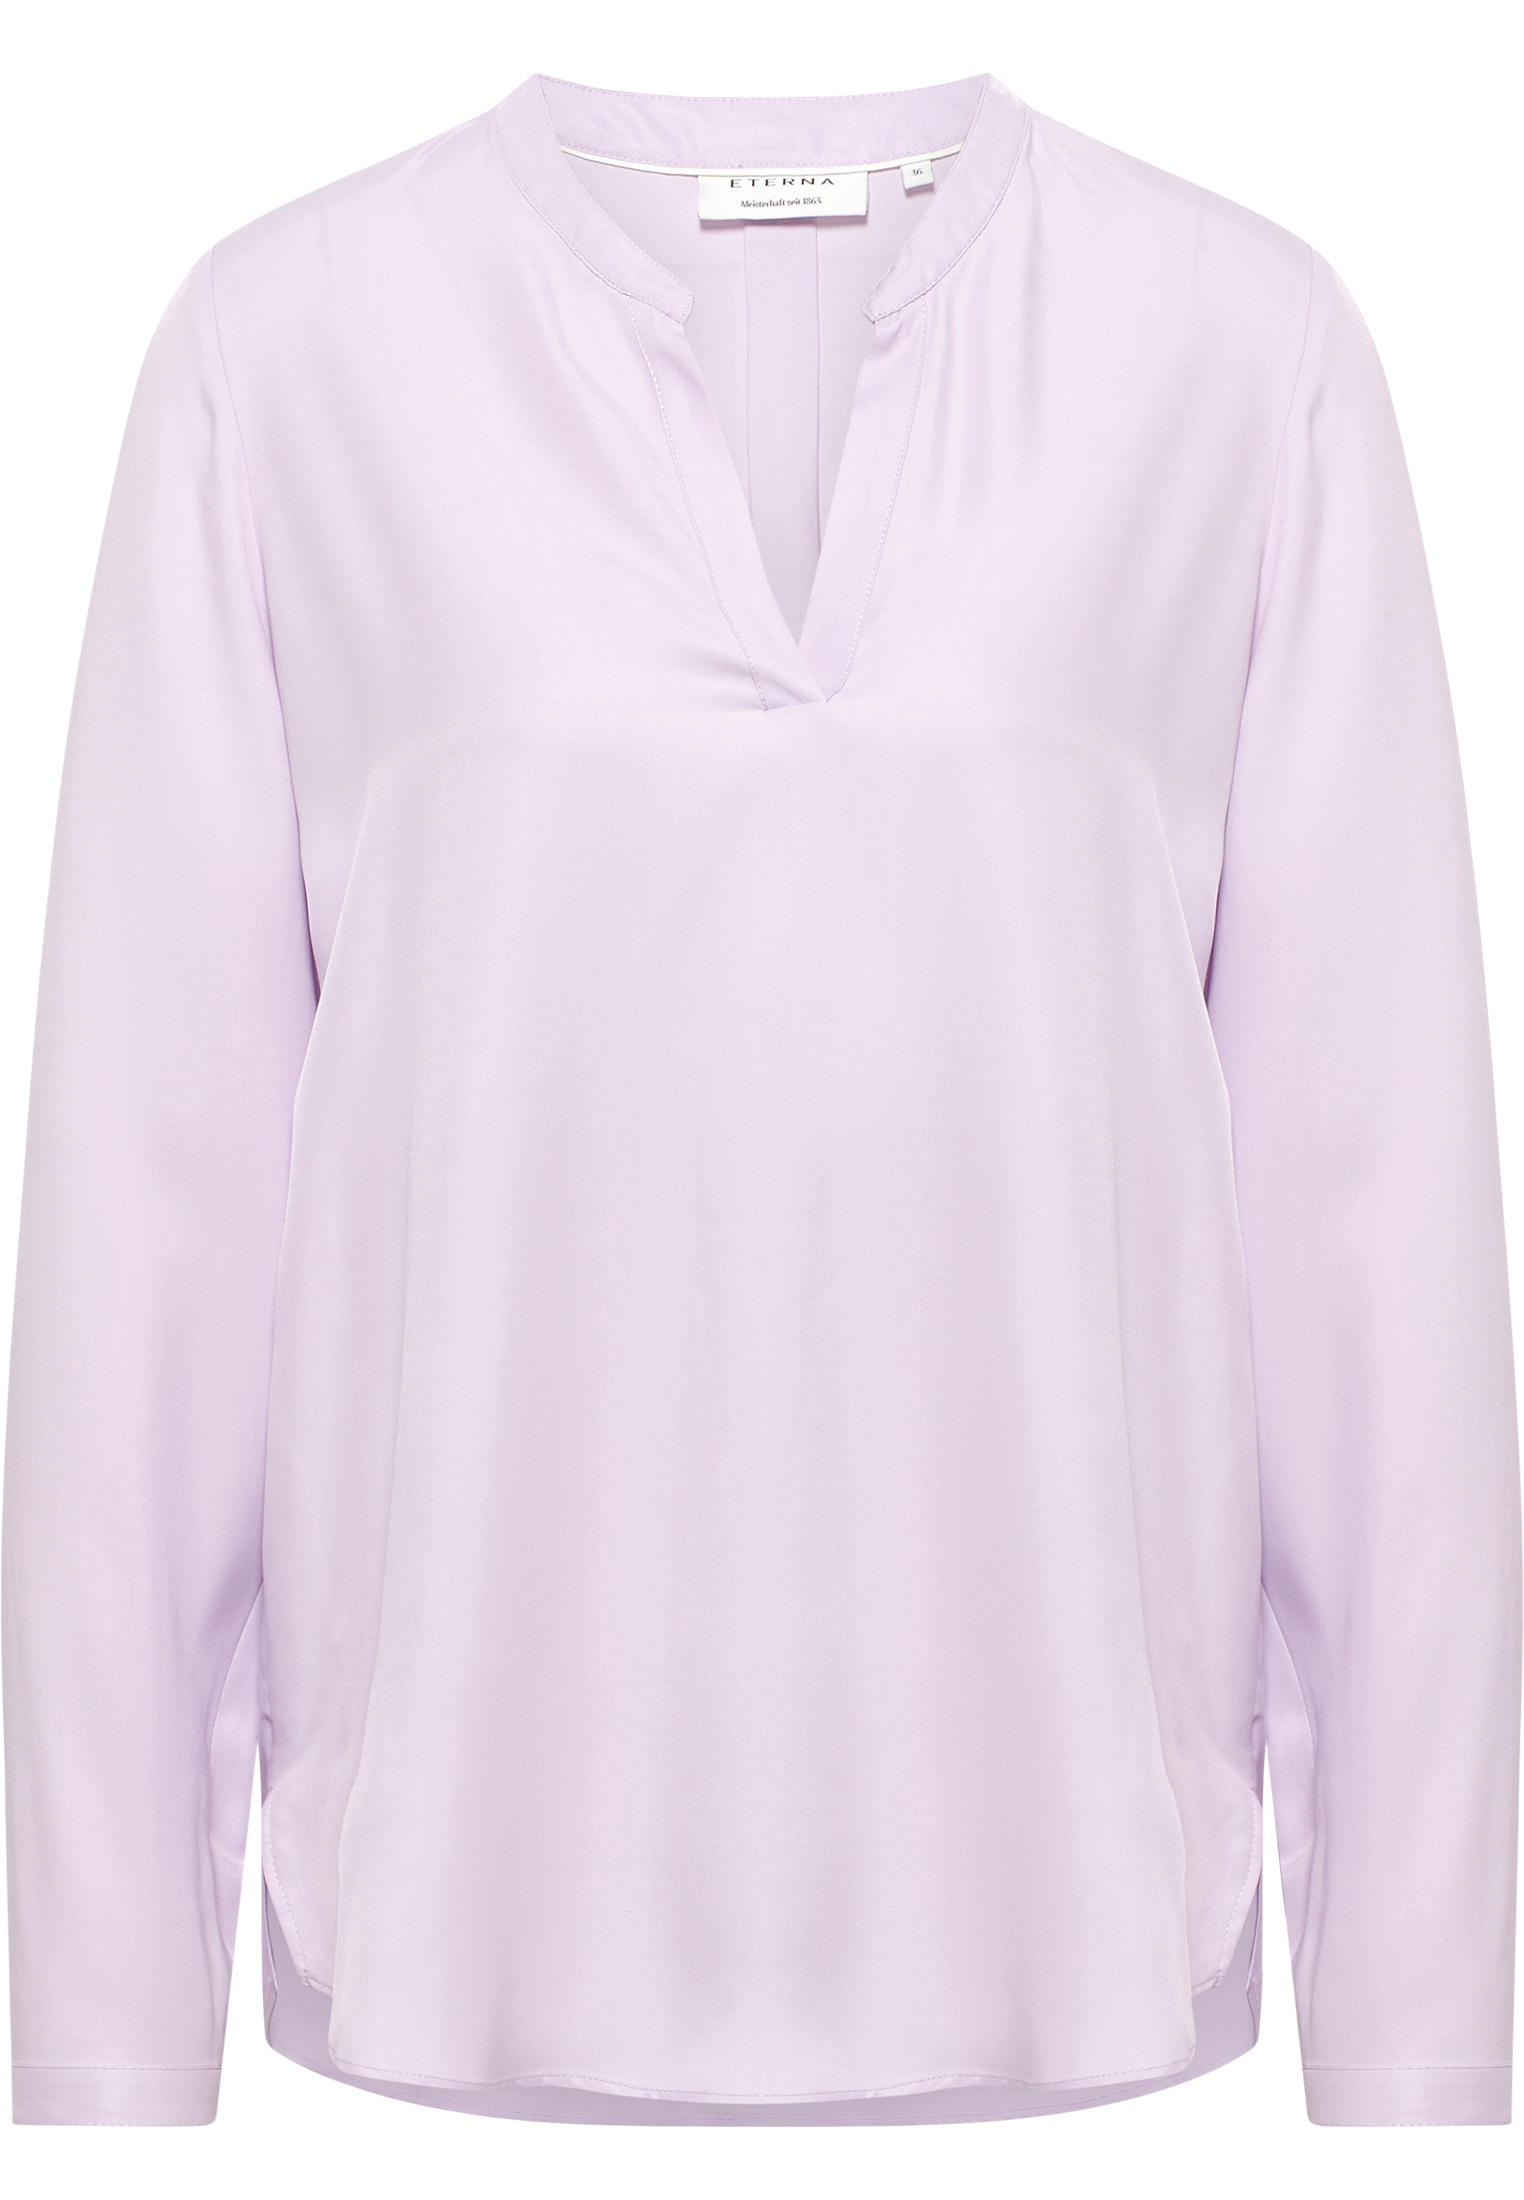 Viscose Shirt Bluse in orchid unifarben | orchid | 48 | Langarm |  2BL04297-09-21-48-1/1